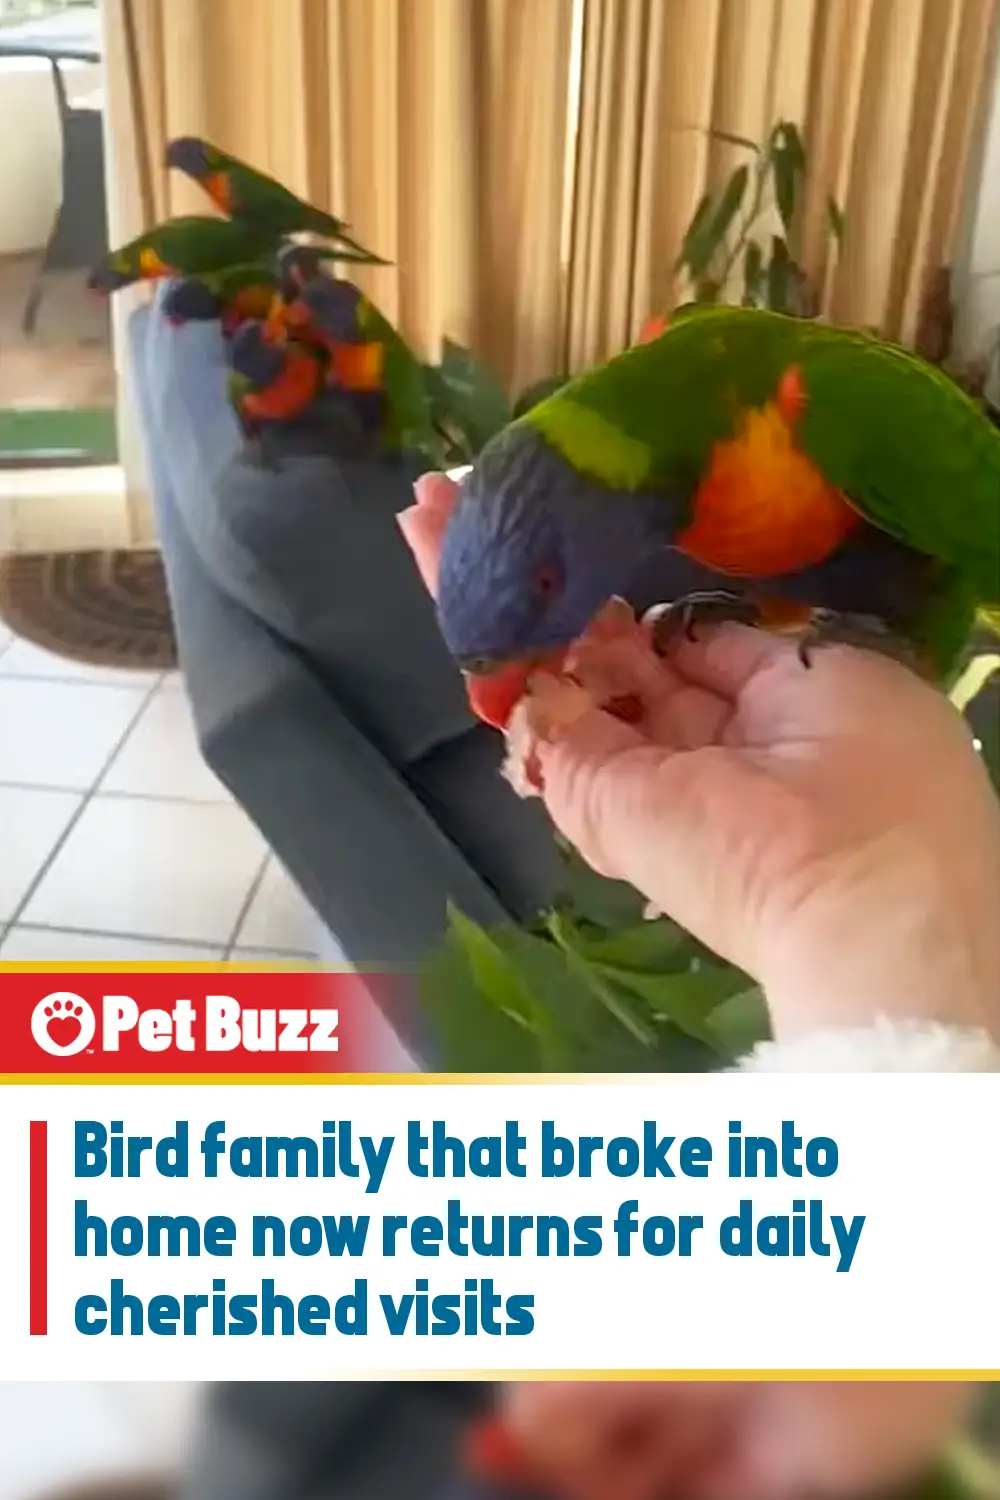 Bird family that broke into home now returns for daily cherished visits